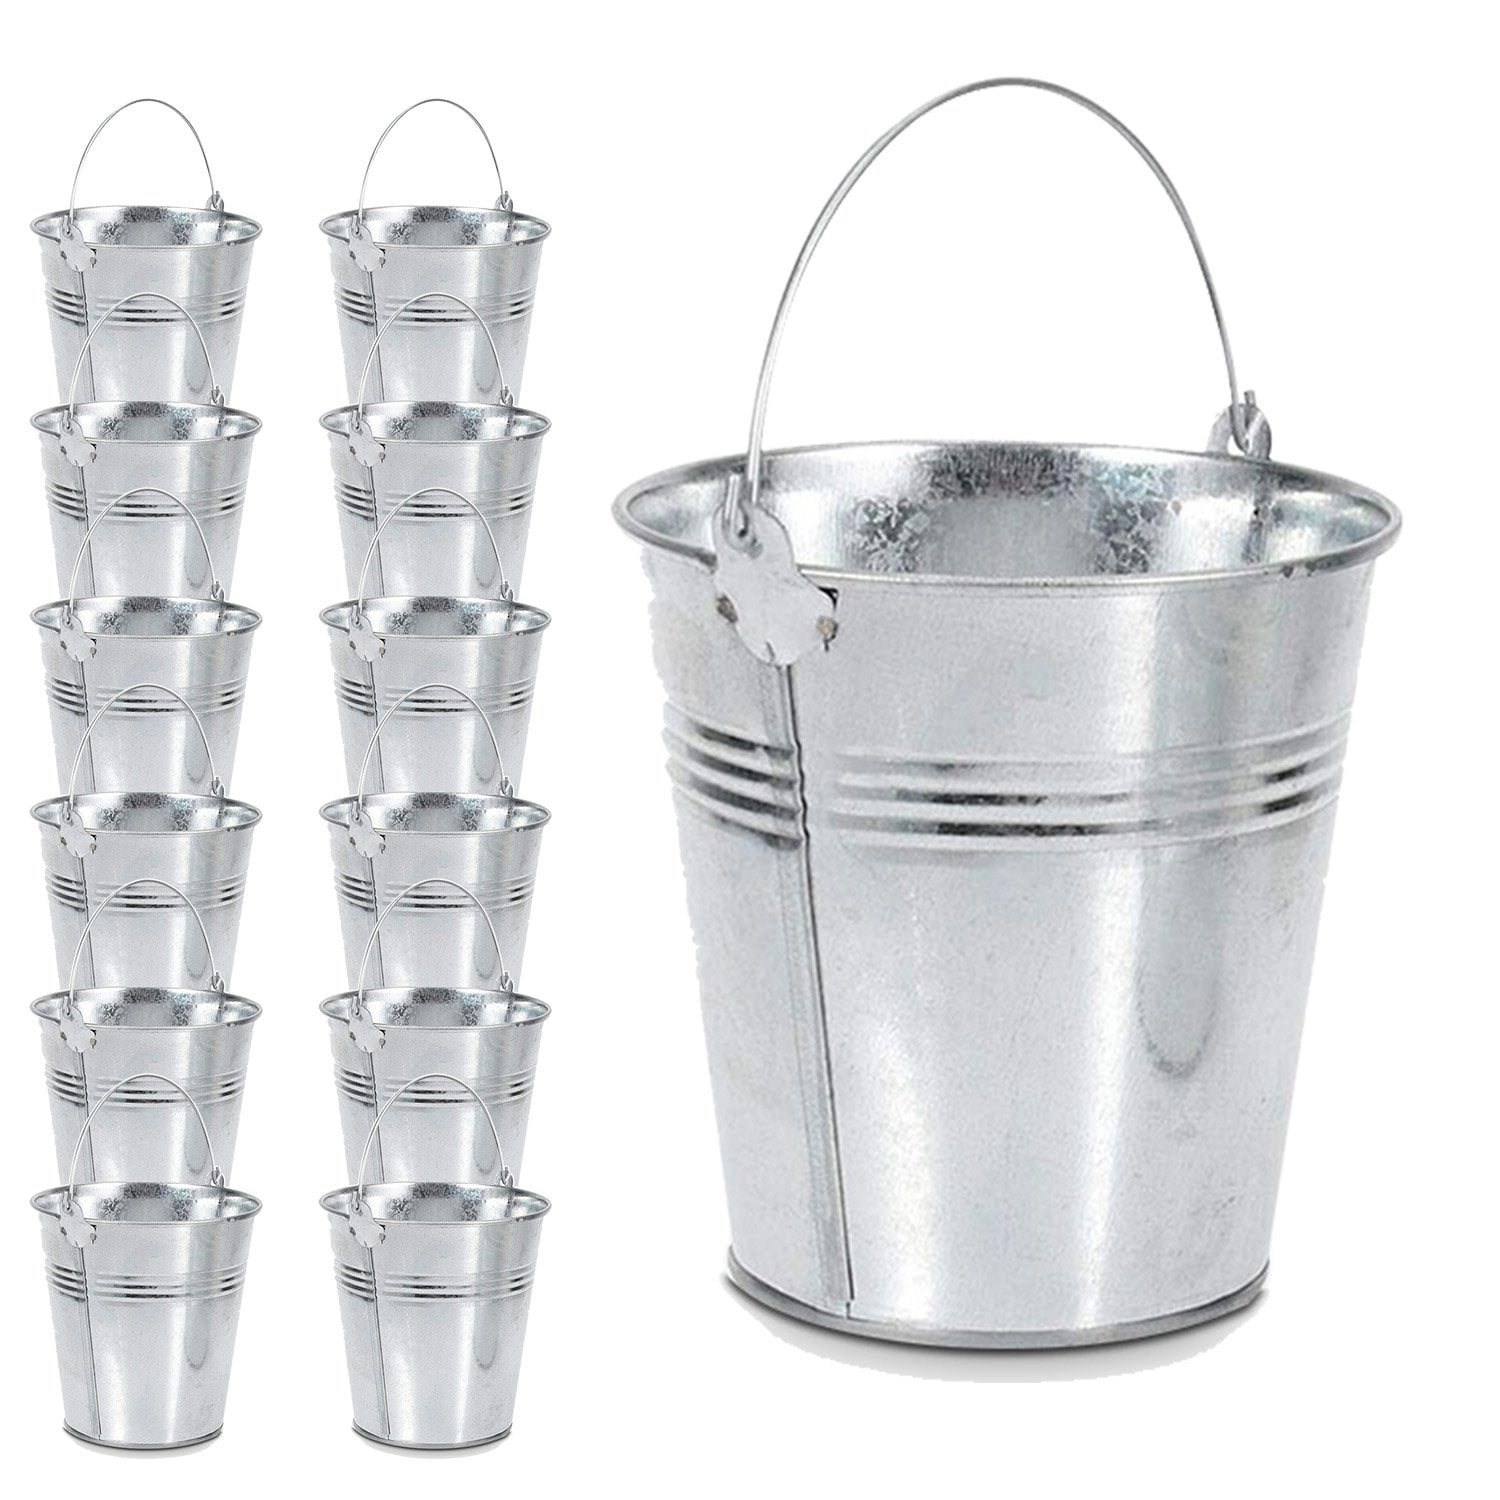 1 Dozen Great Buckets for Planters or Unique Goody Baskets dazzling toys Large Galvanized Buckets